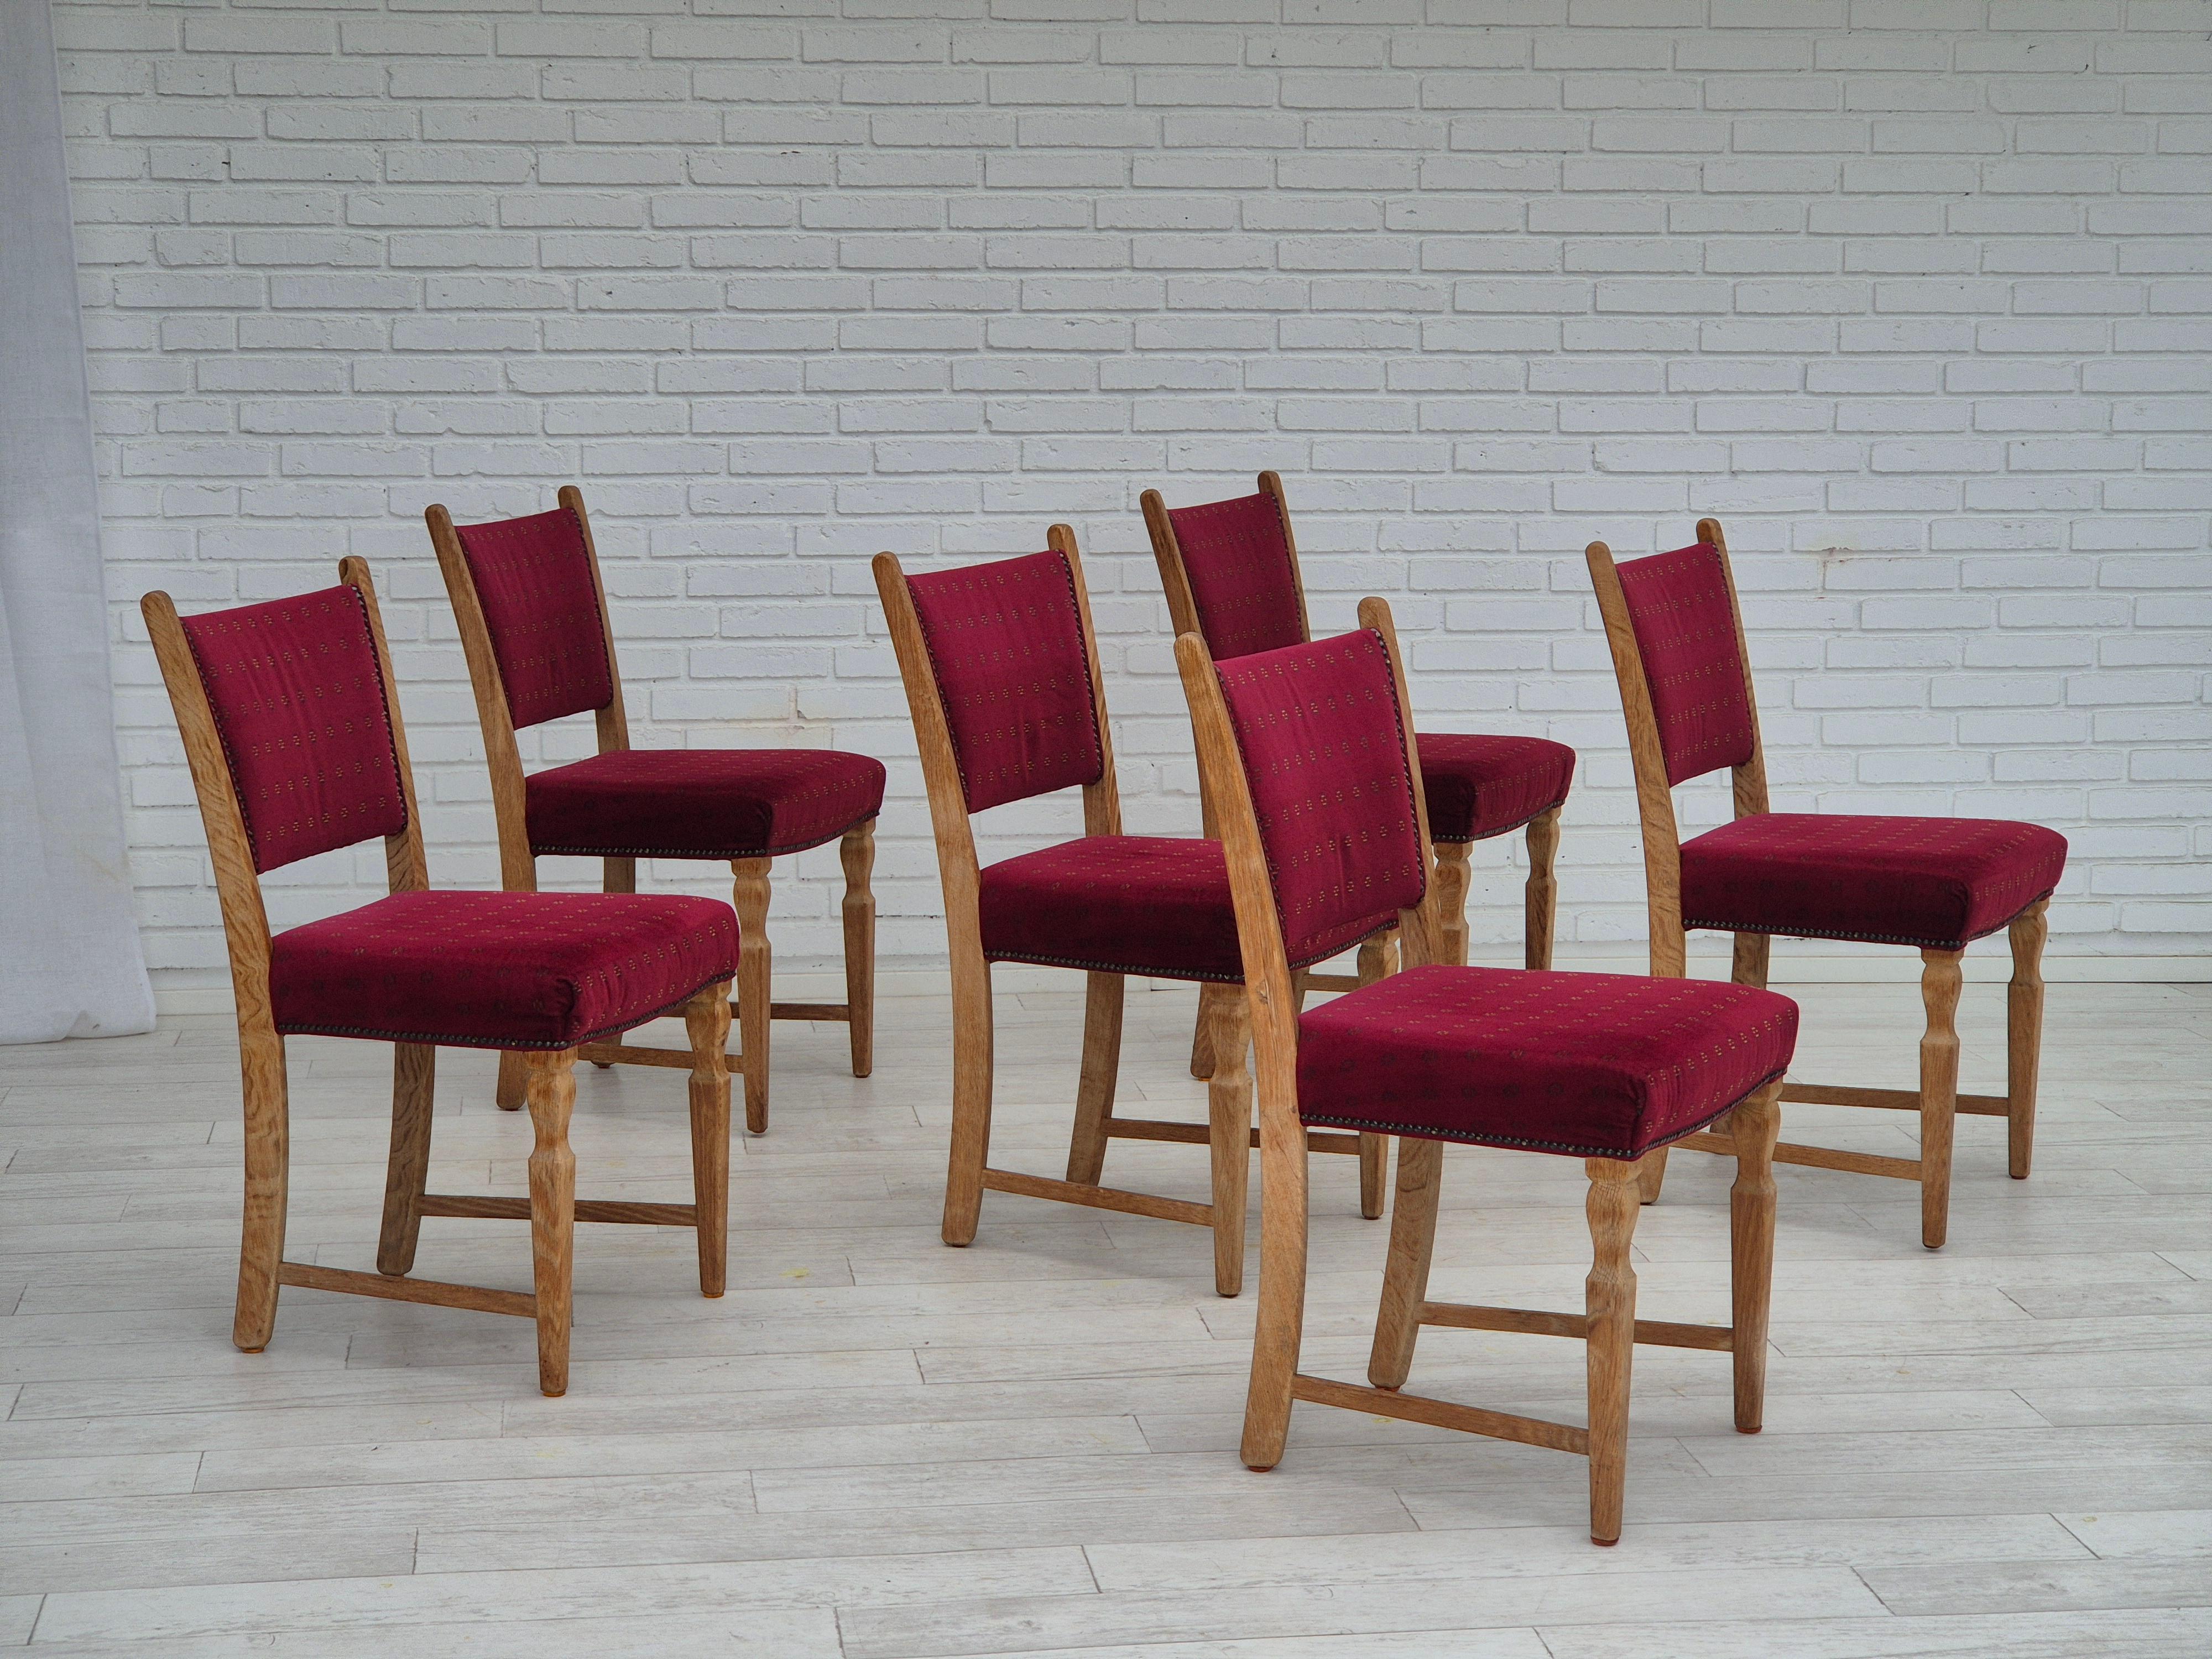 1970s, set of 6 Danish dining chairs. Oiled oak wood, red furniture velour. Chairs reupholstered in about 10 years ago: very good condition: no smells and no stains. Manufactured by Danish furniture manufacturer in about 1970s.